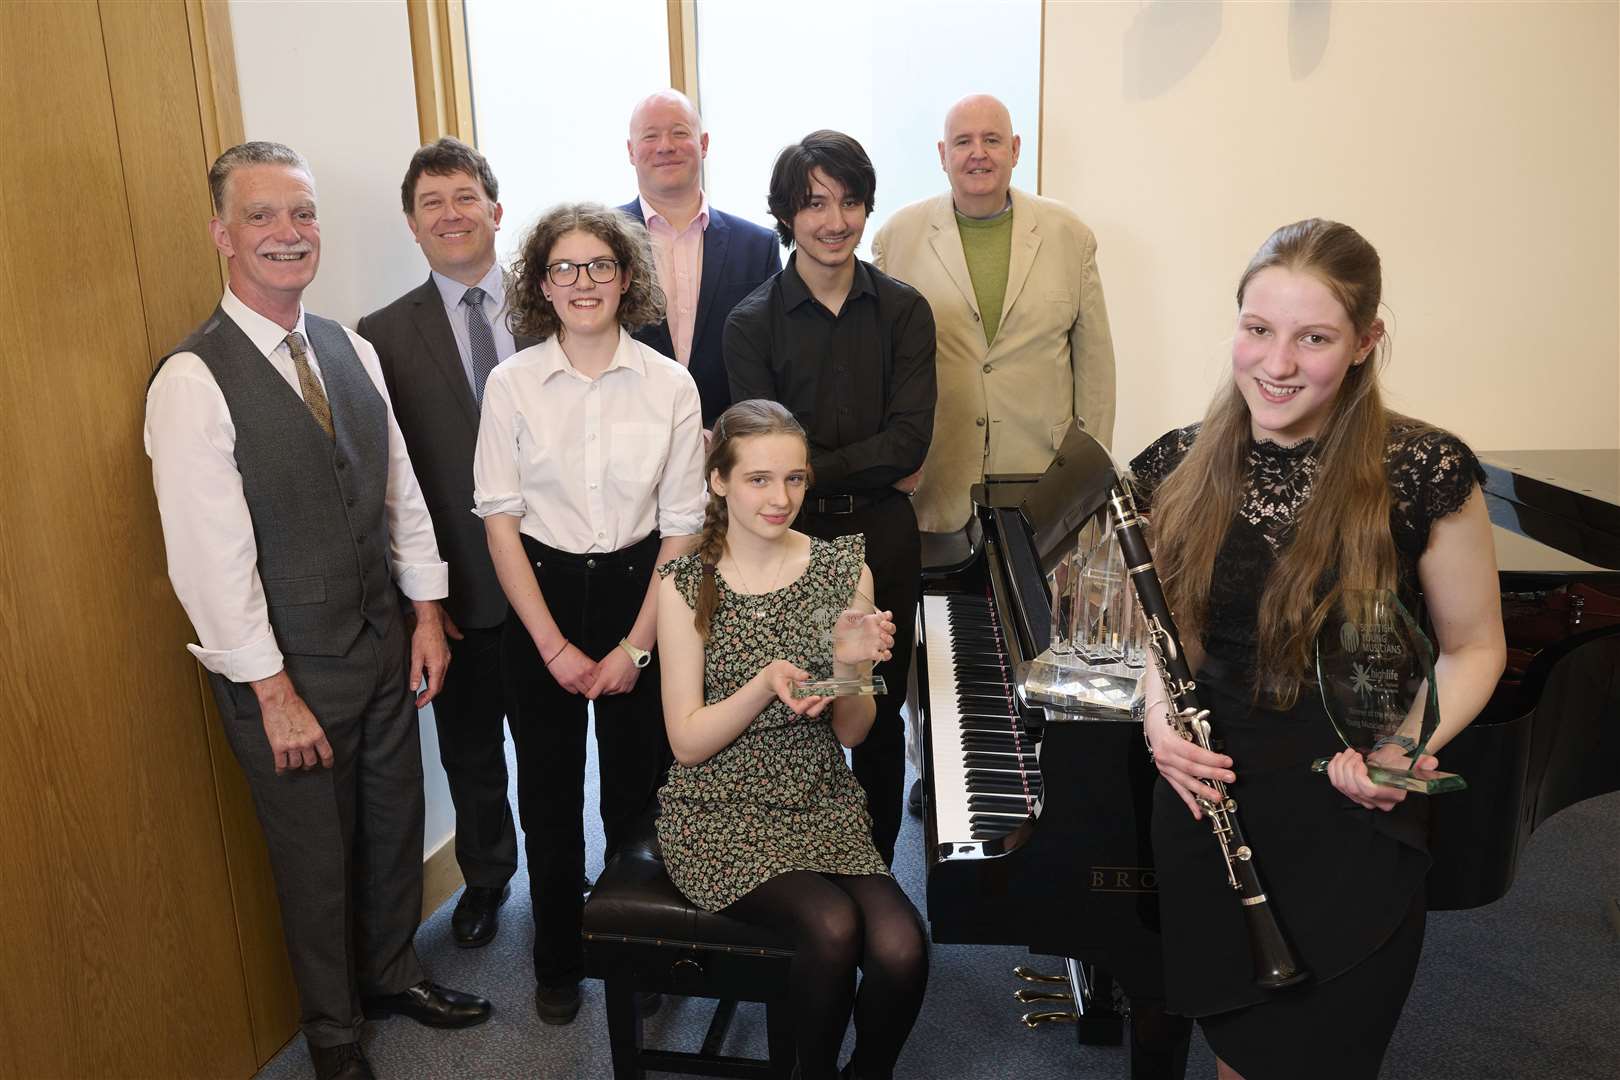 Megan Fisher – Winner (foreground) and all other competitors and judges, and Norman Bolton, HLH -Head of Music Development.